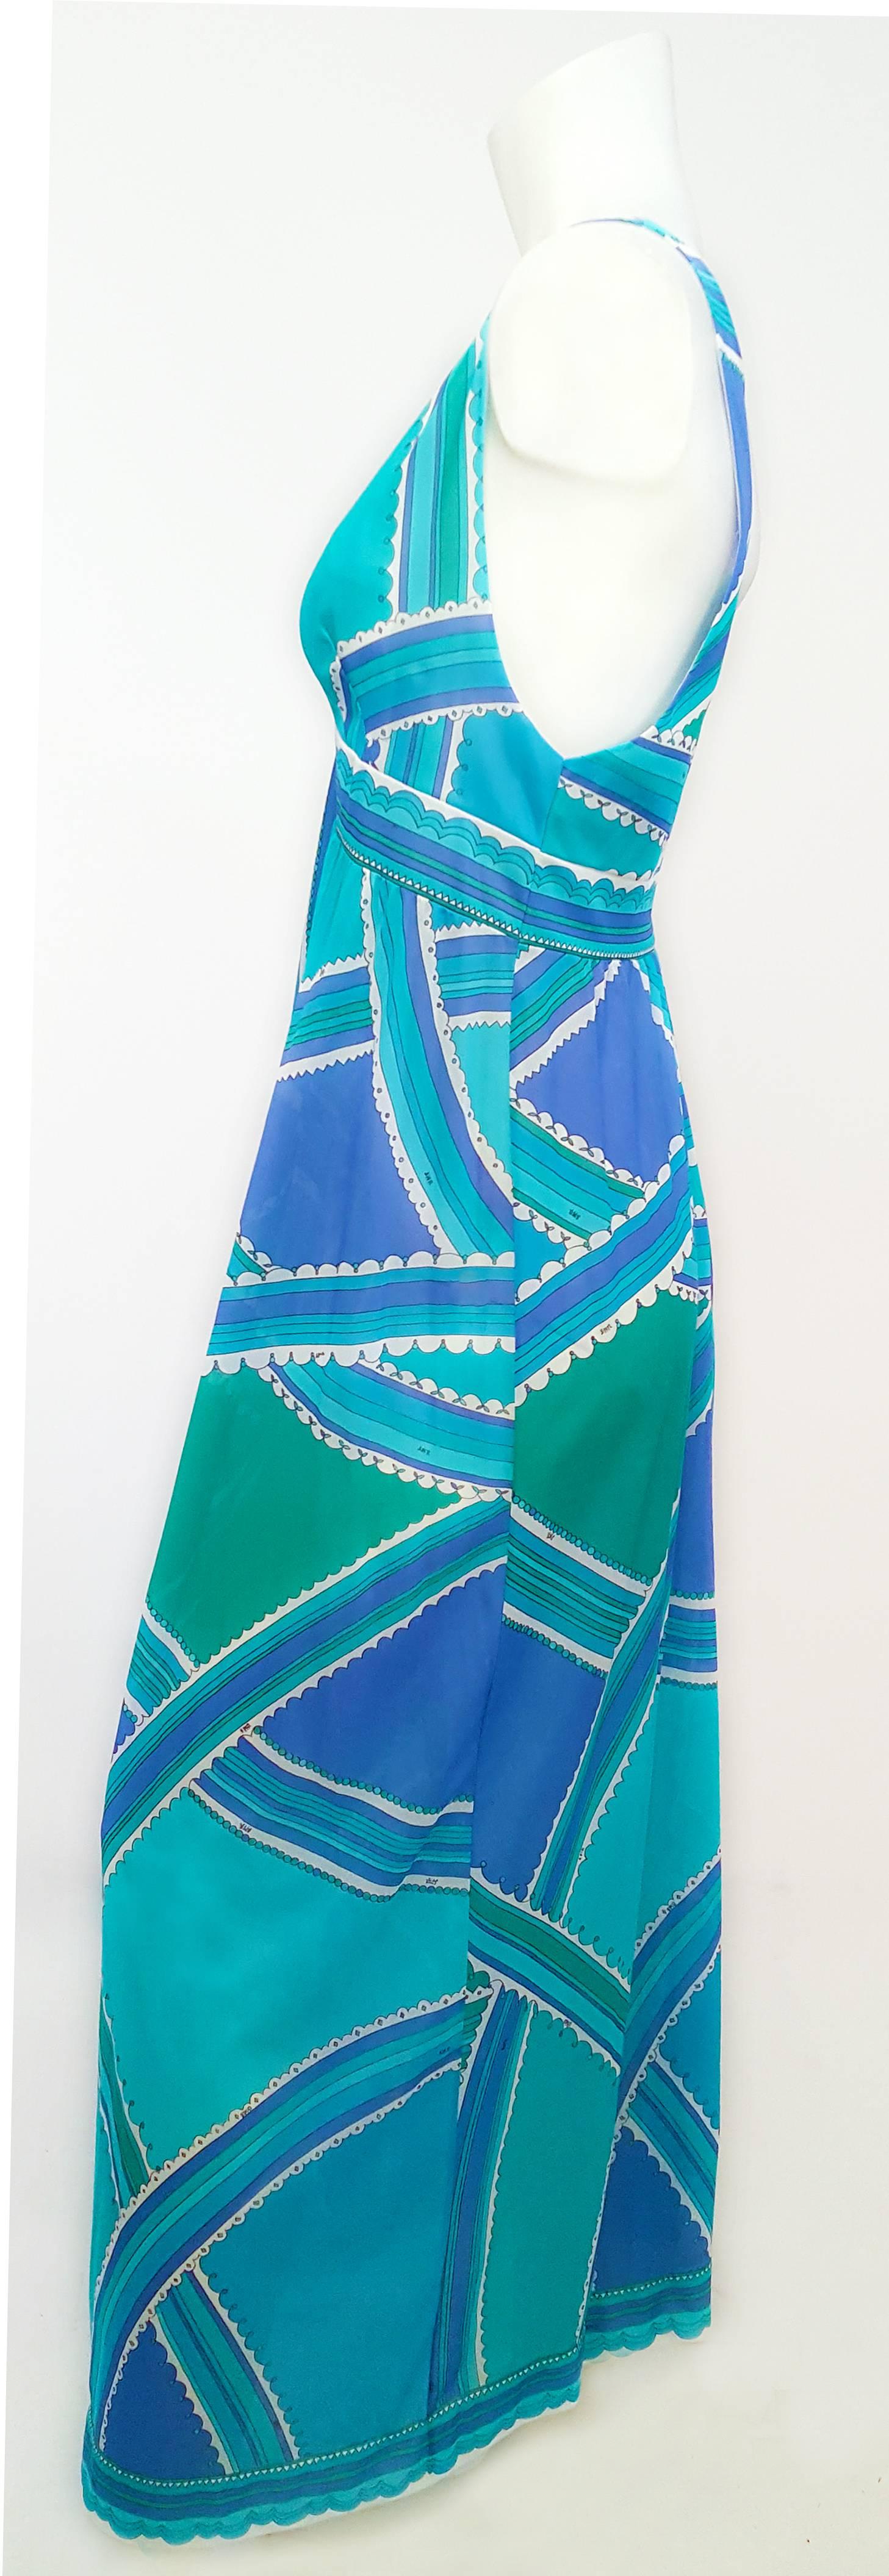 70s Emilio Pucci for Formfit Rodgers Blue/Green Printed Slip/Dress. Nylon jersey.